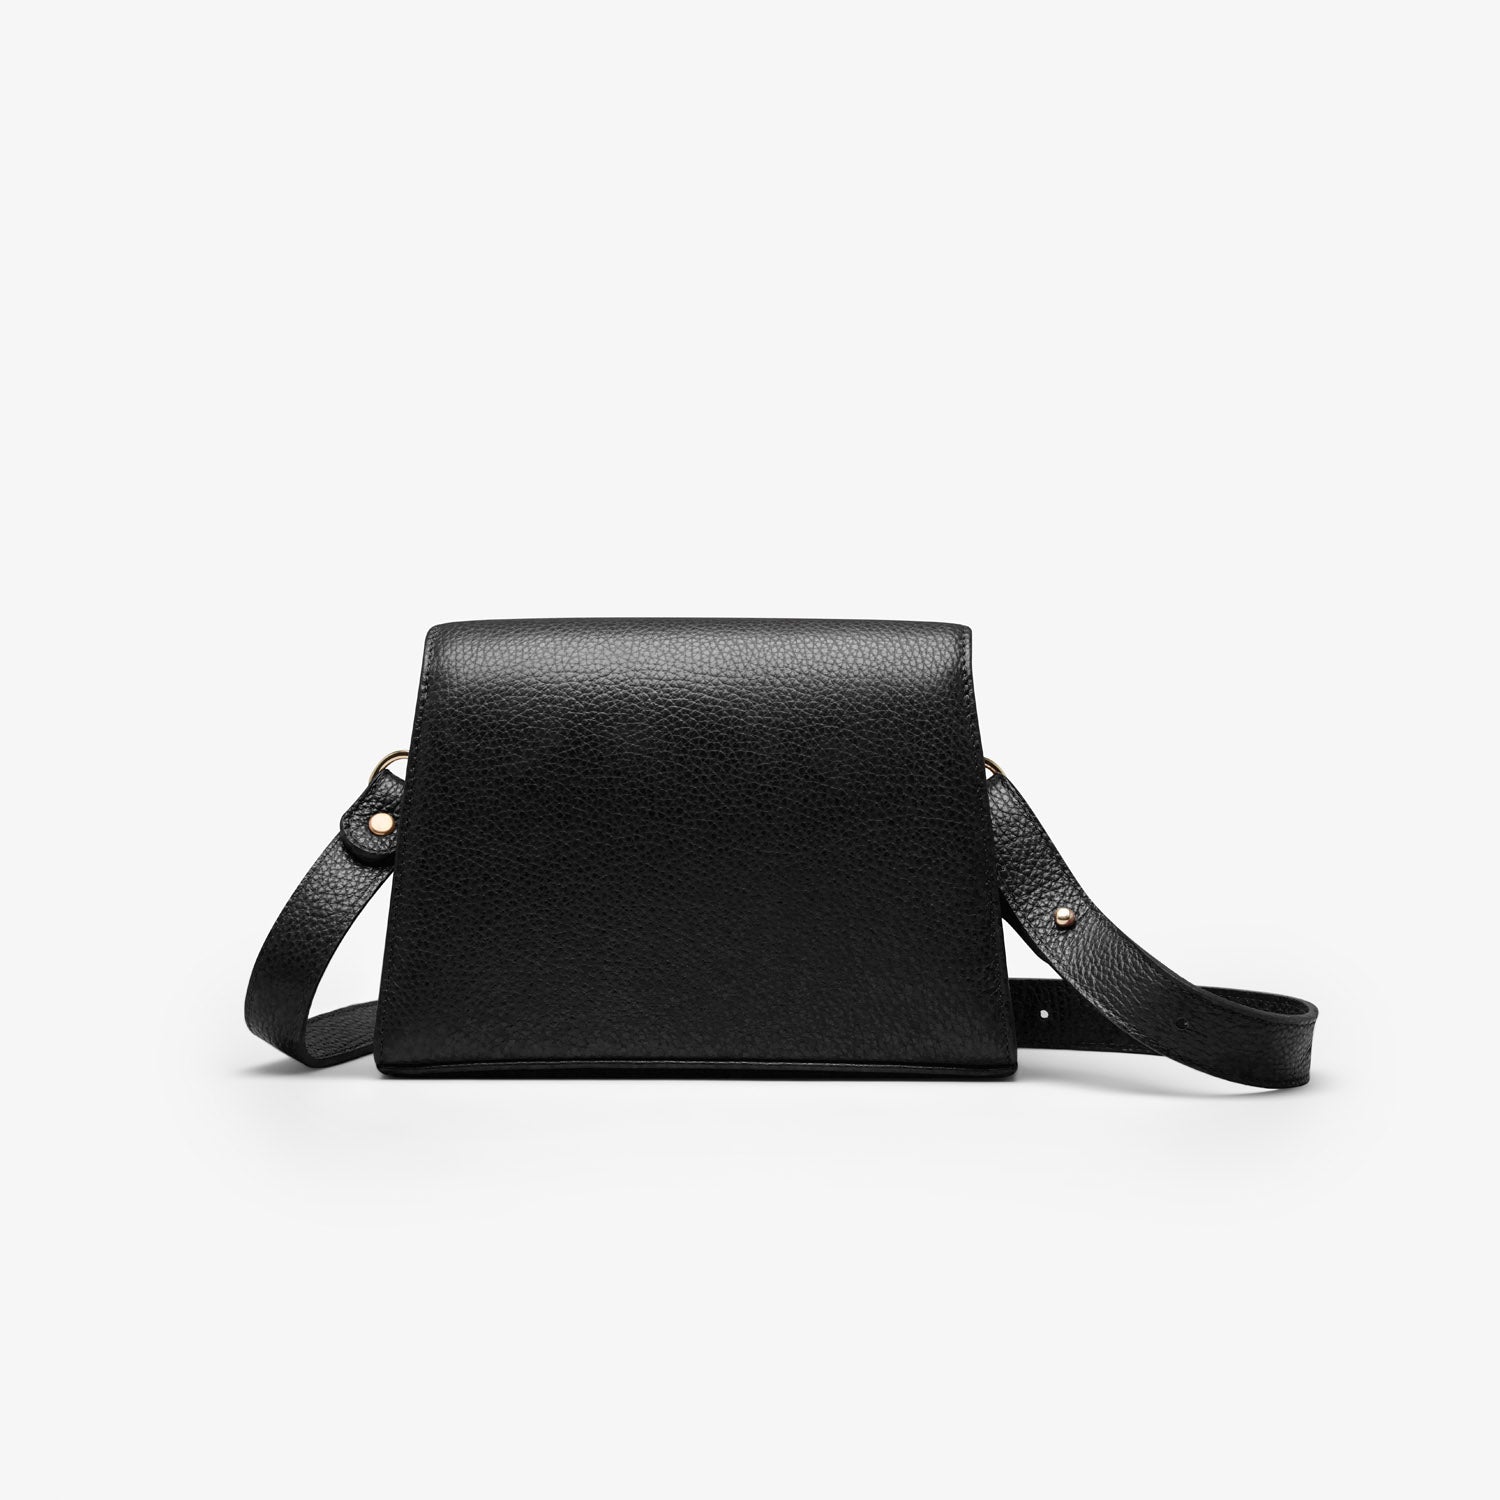 Shows the backside of a black grained leather handbag with light gold metalware and an adjustable strap for a comfortable crossbody or shoulder fit. 